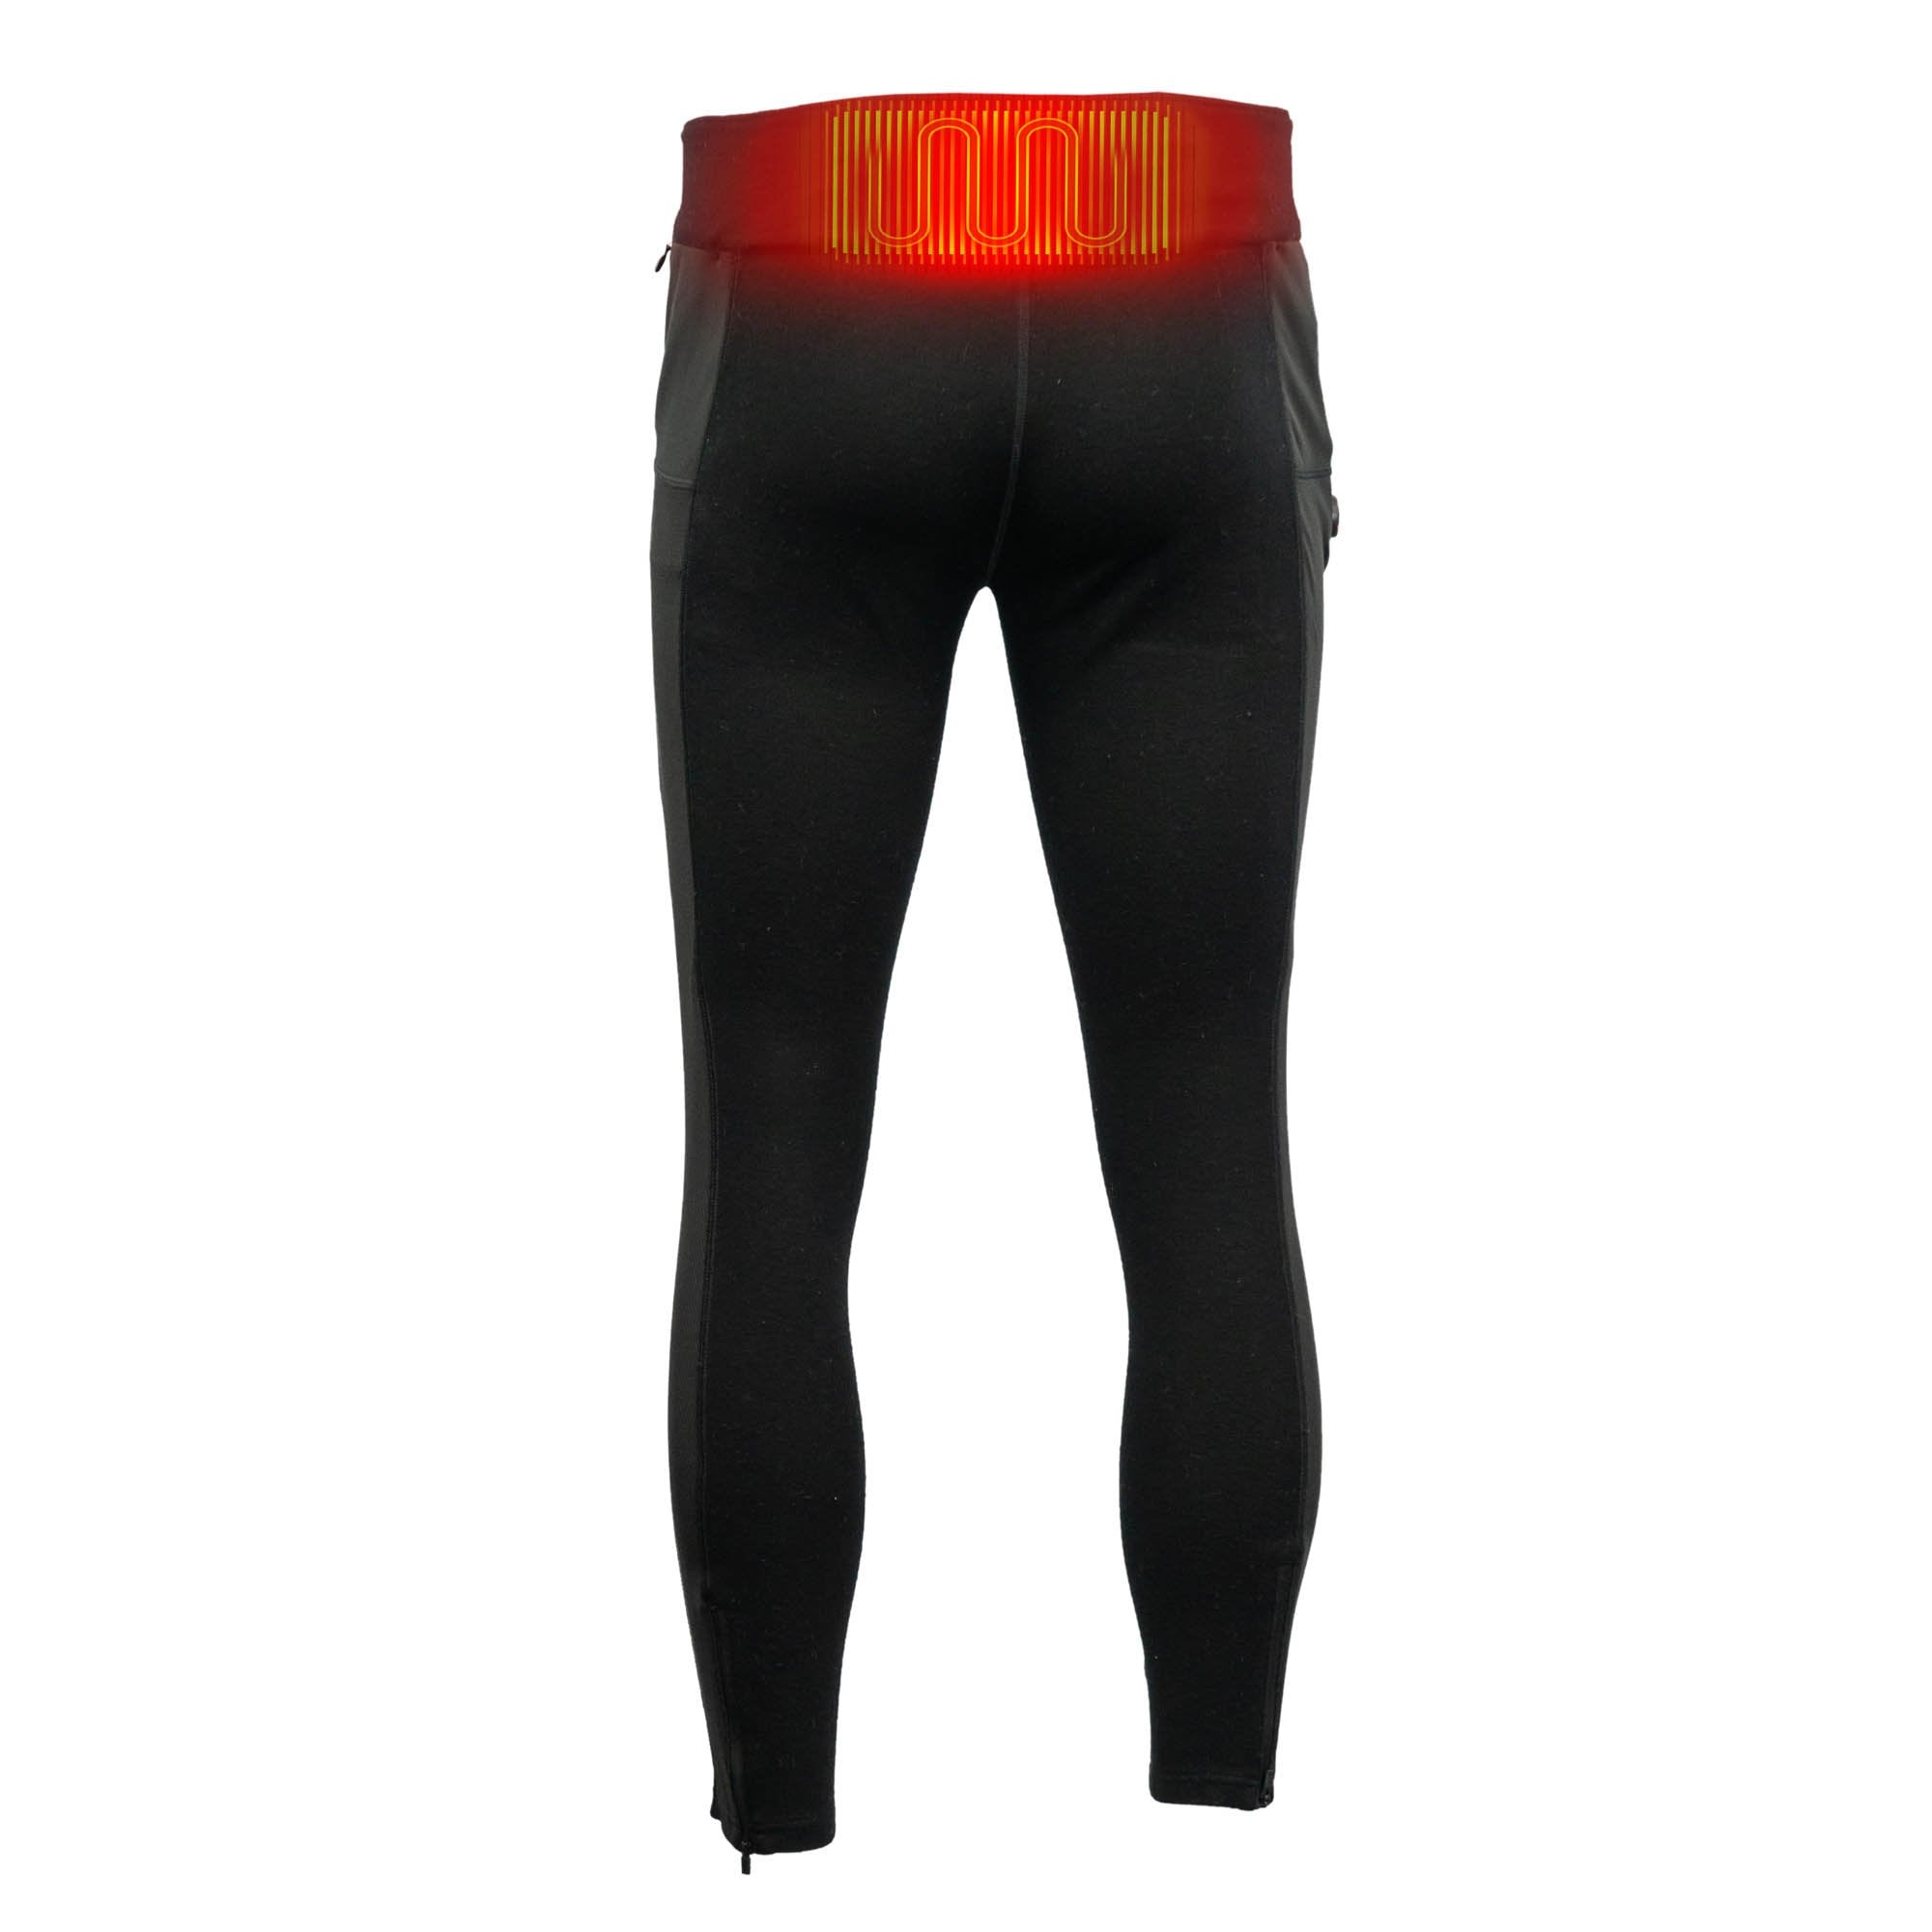 Mobile Warming 7.4V Women's Baselayer Ion Heated Pant - Previous